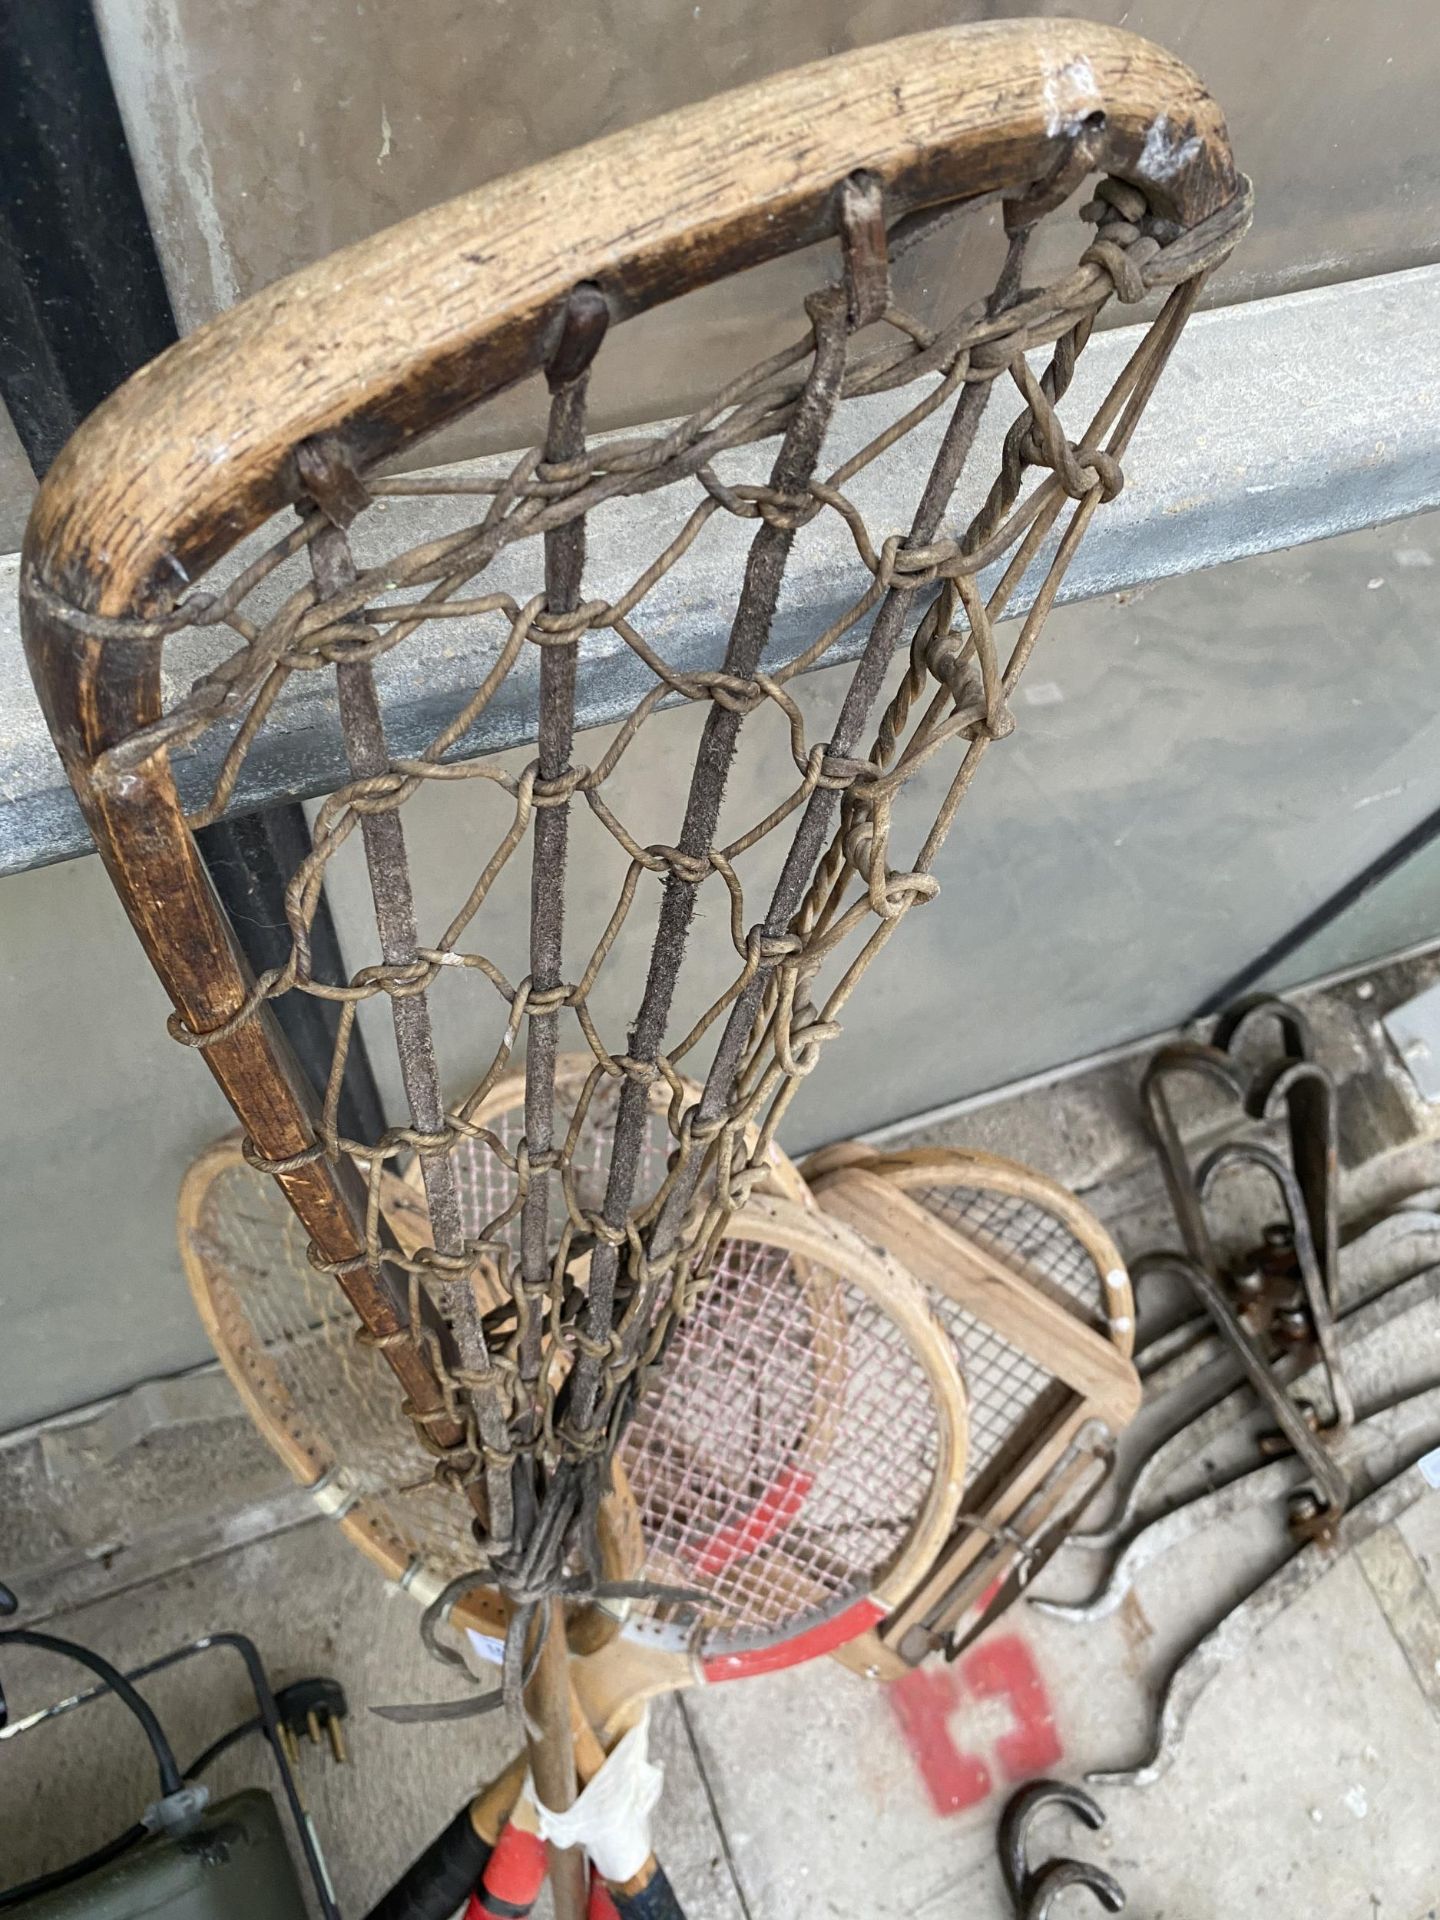 FOUR VINTAGE WOODEN TENNIS RACKETS AND A LACROSS RACKET - Image 3 of 3